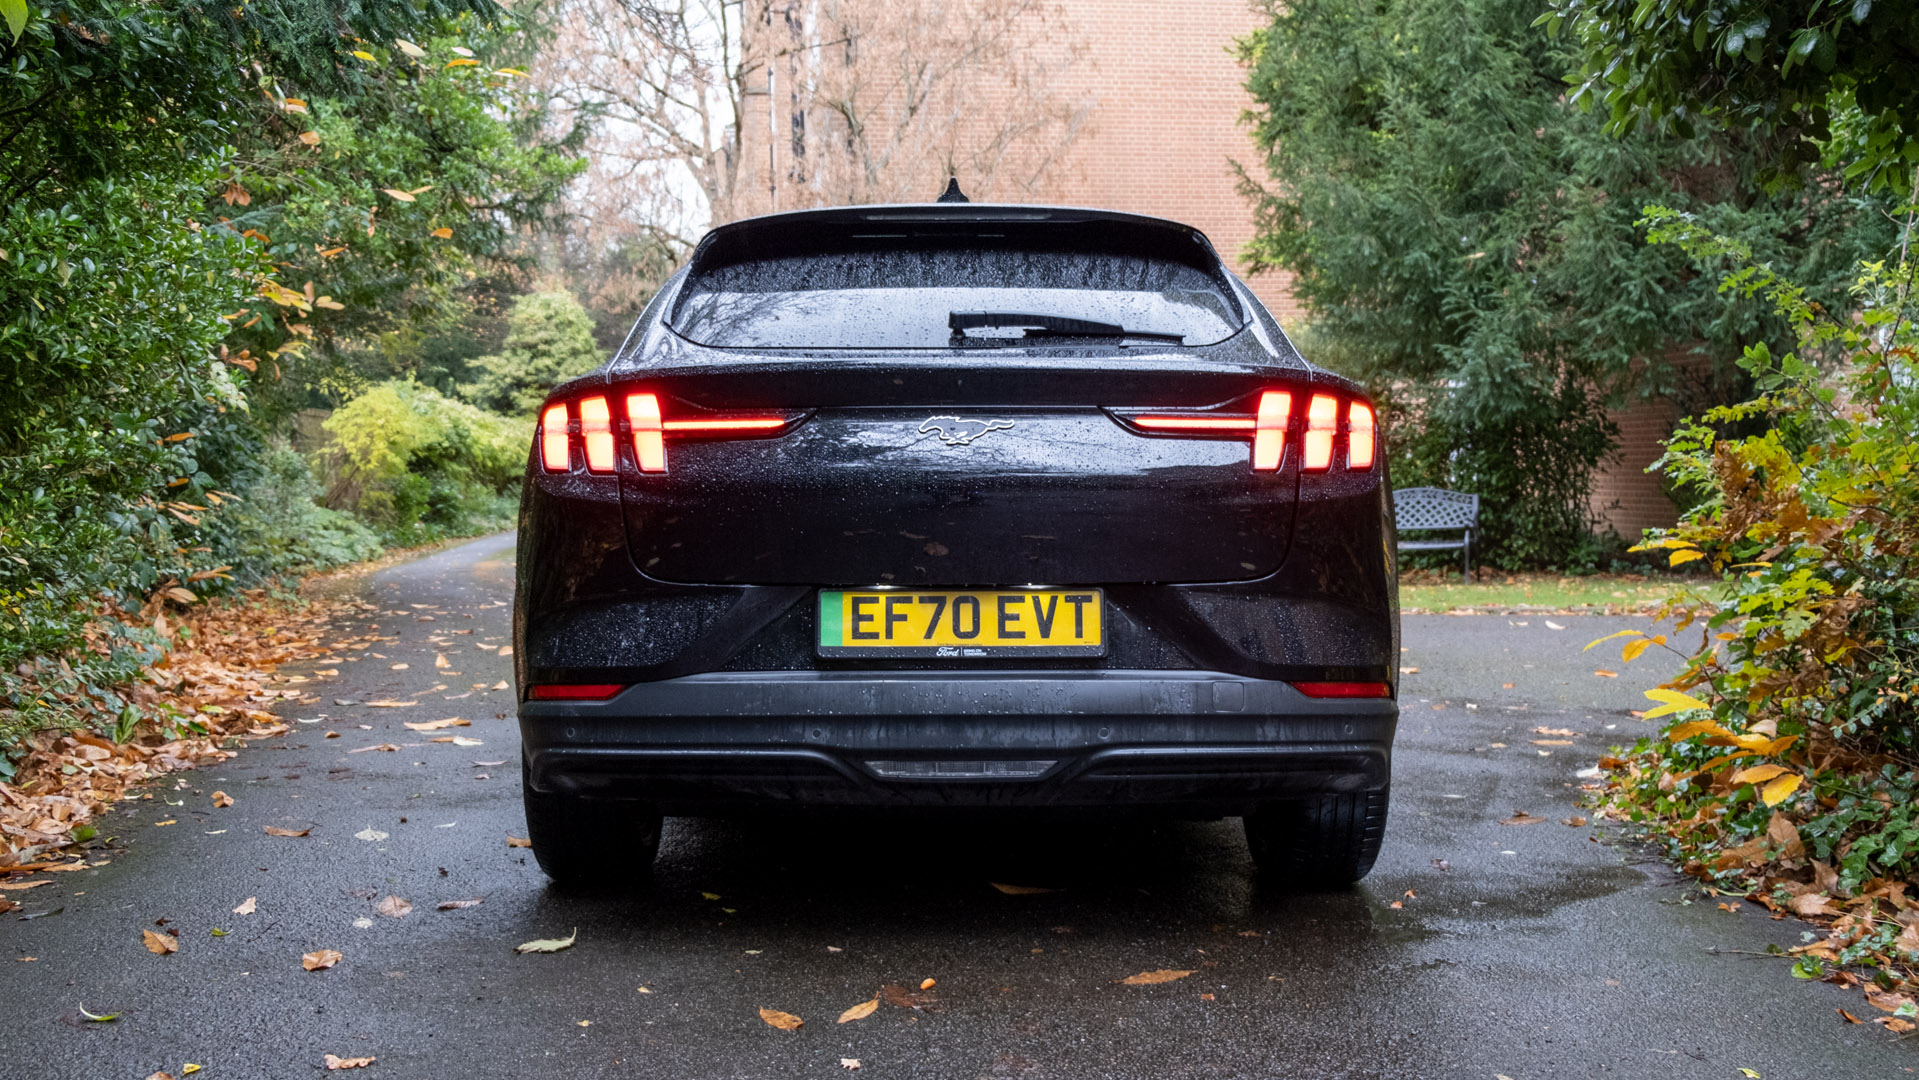 Ford Mustang Mach-E rear